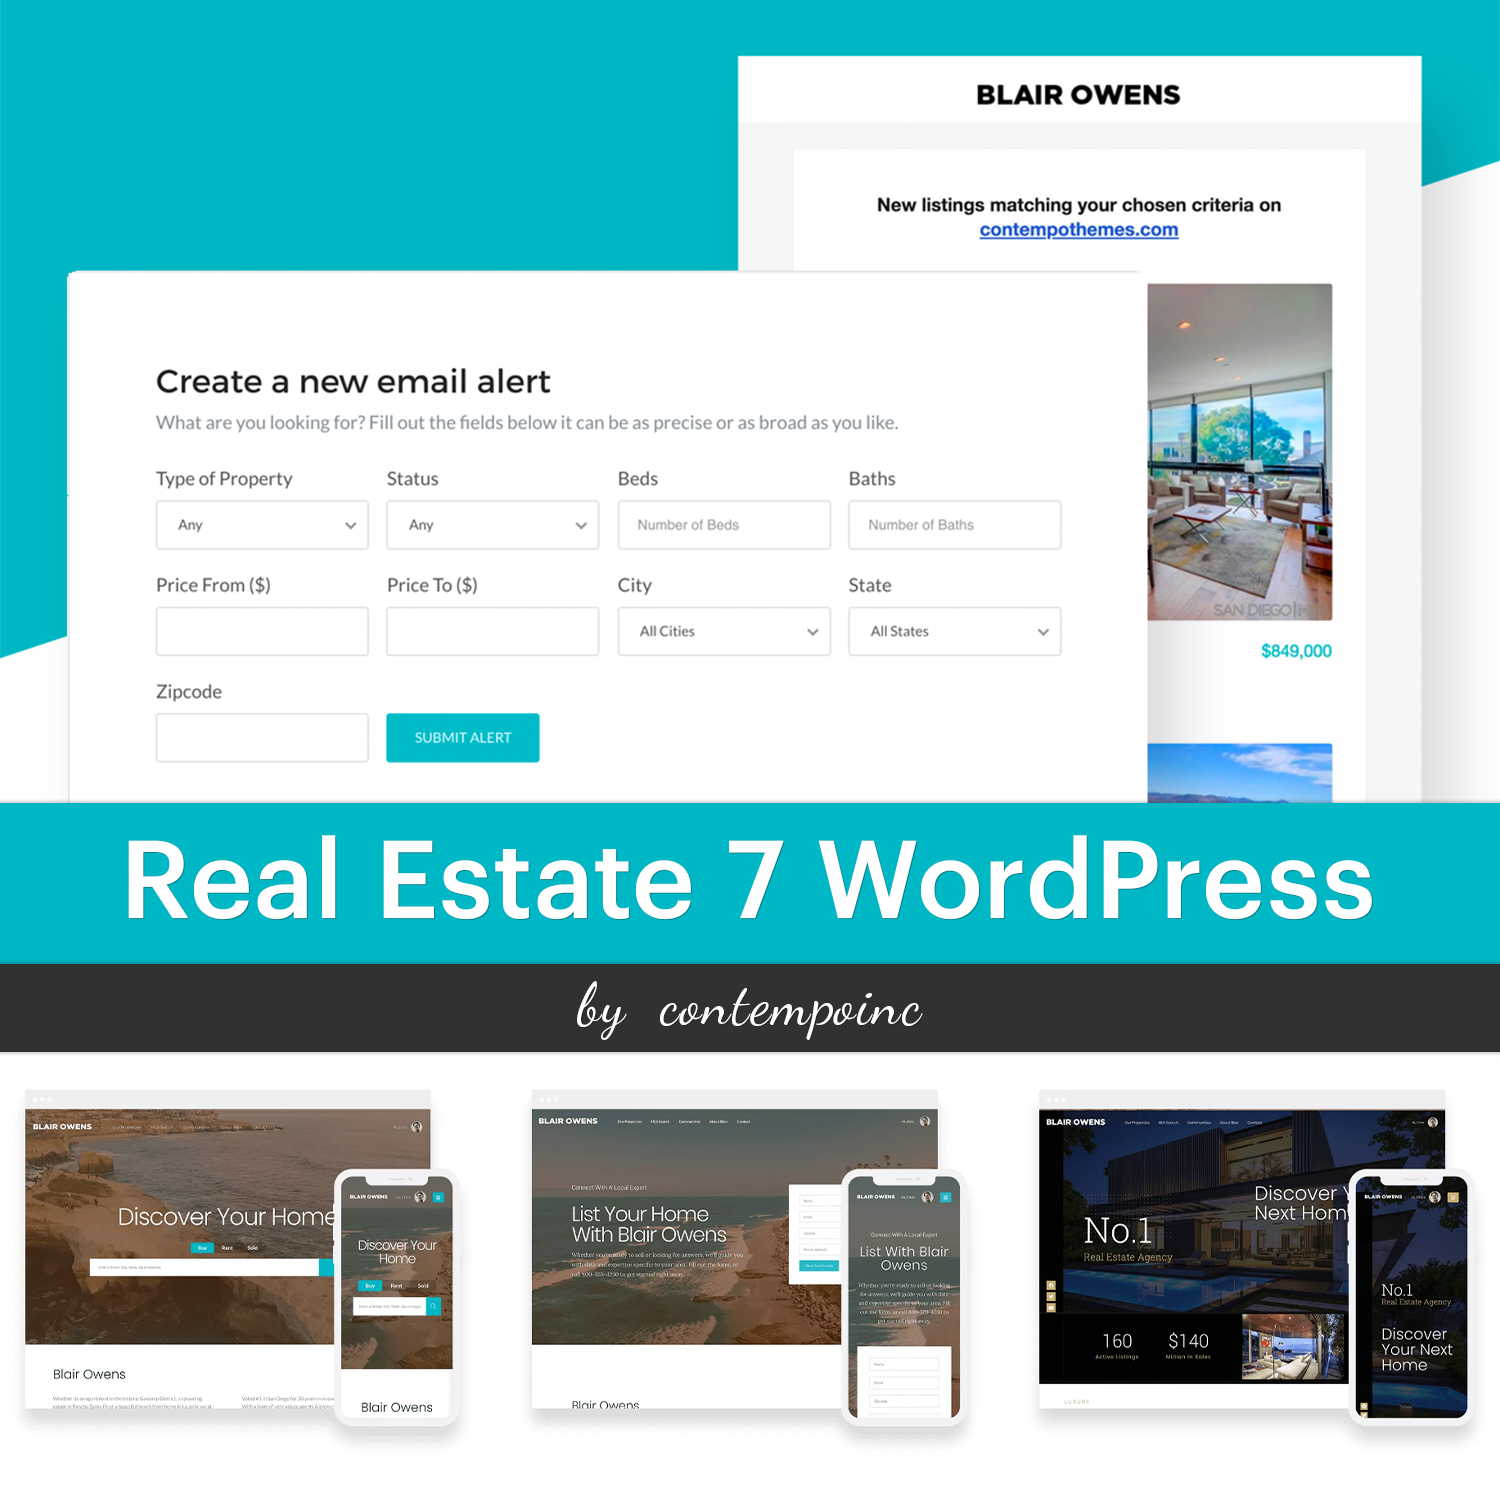 Images with real estate wordpress.